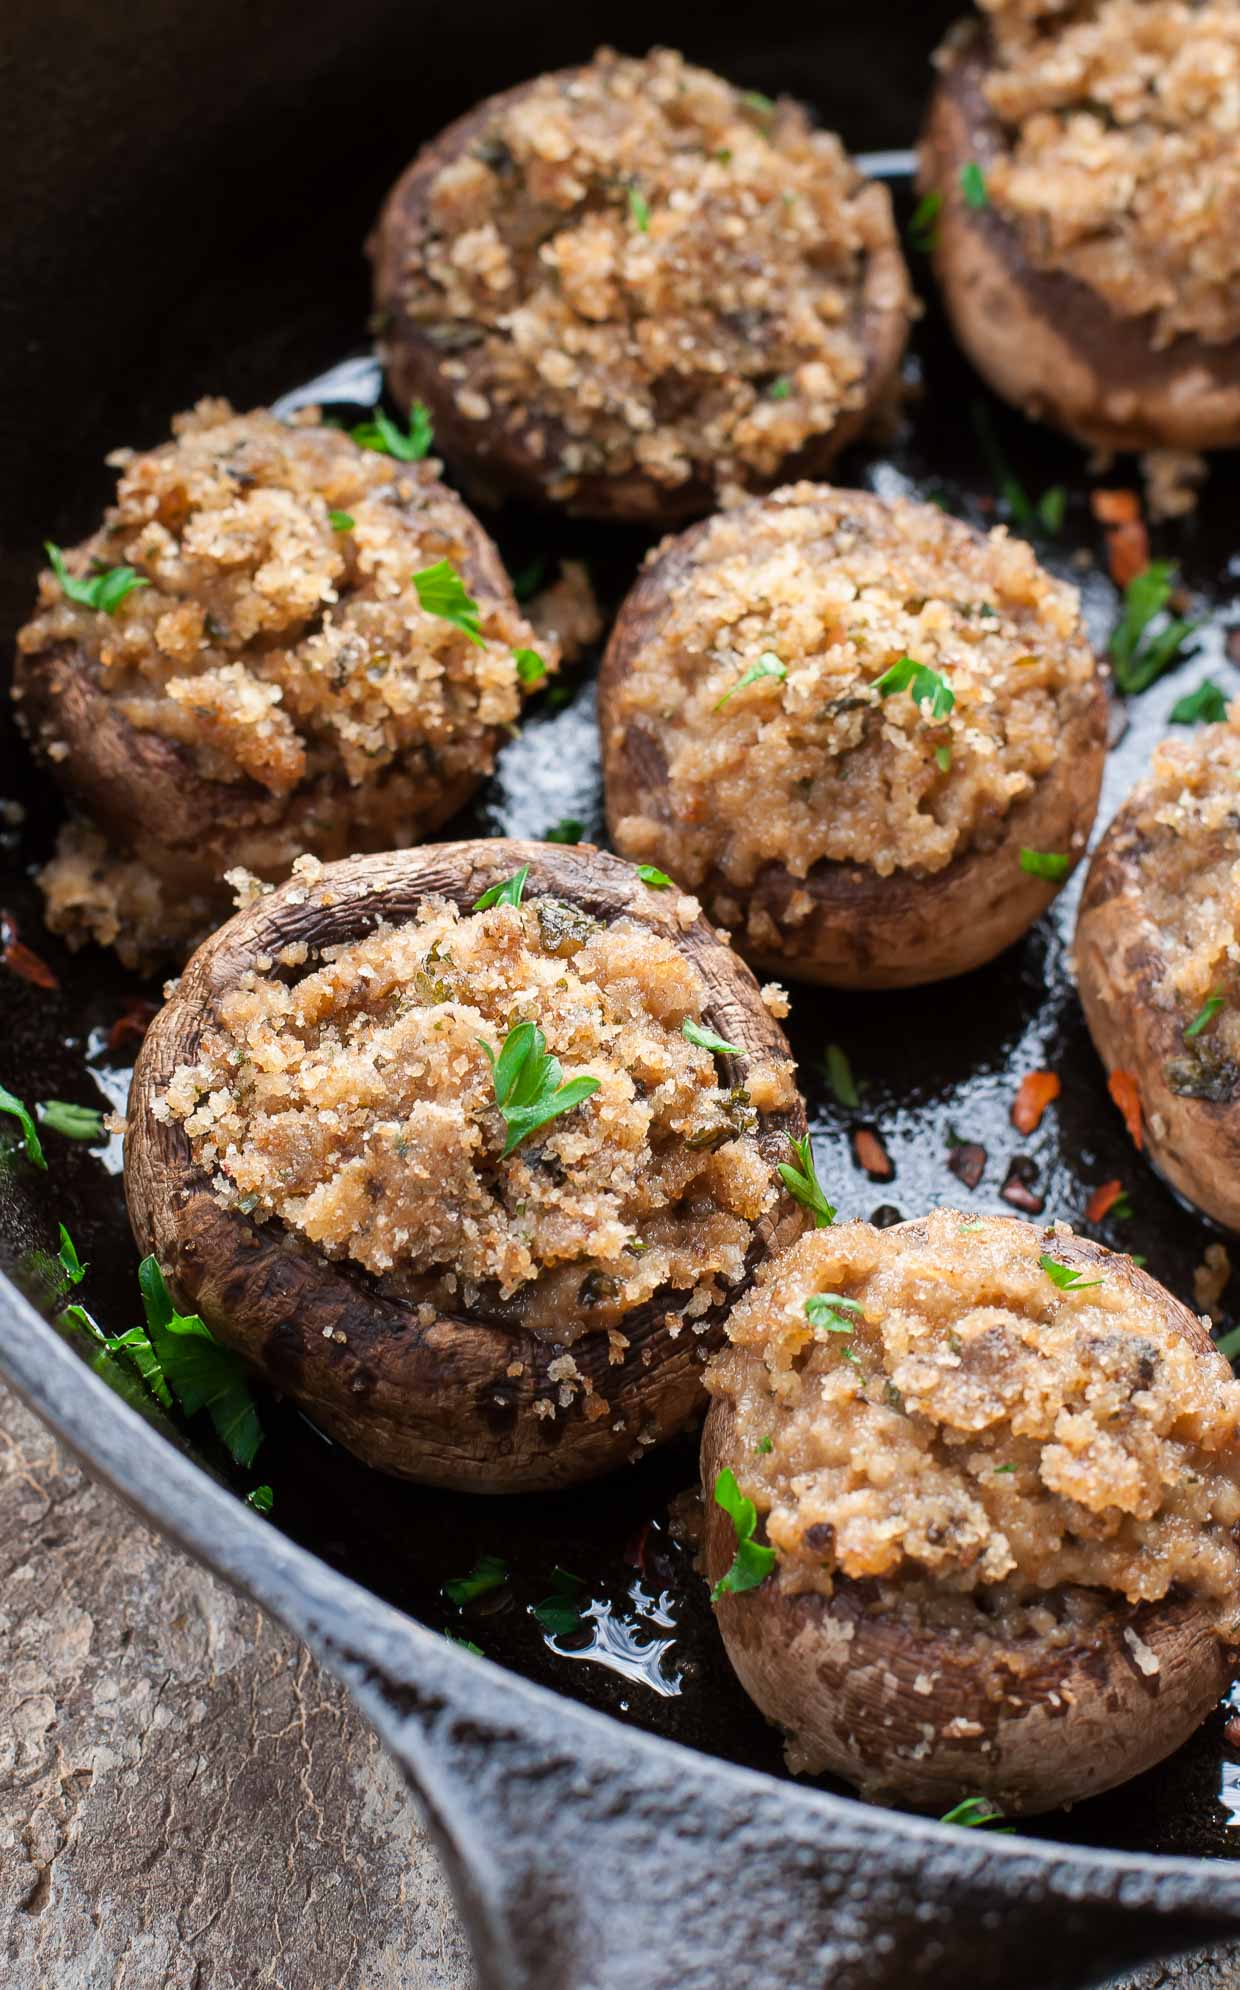 These classic stuffed mushrooms are a total crowd pleaser!